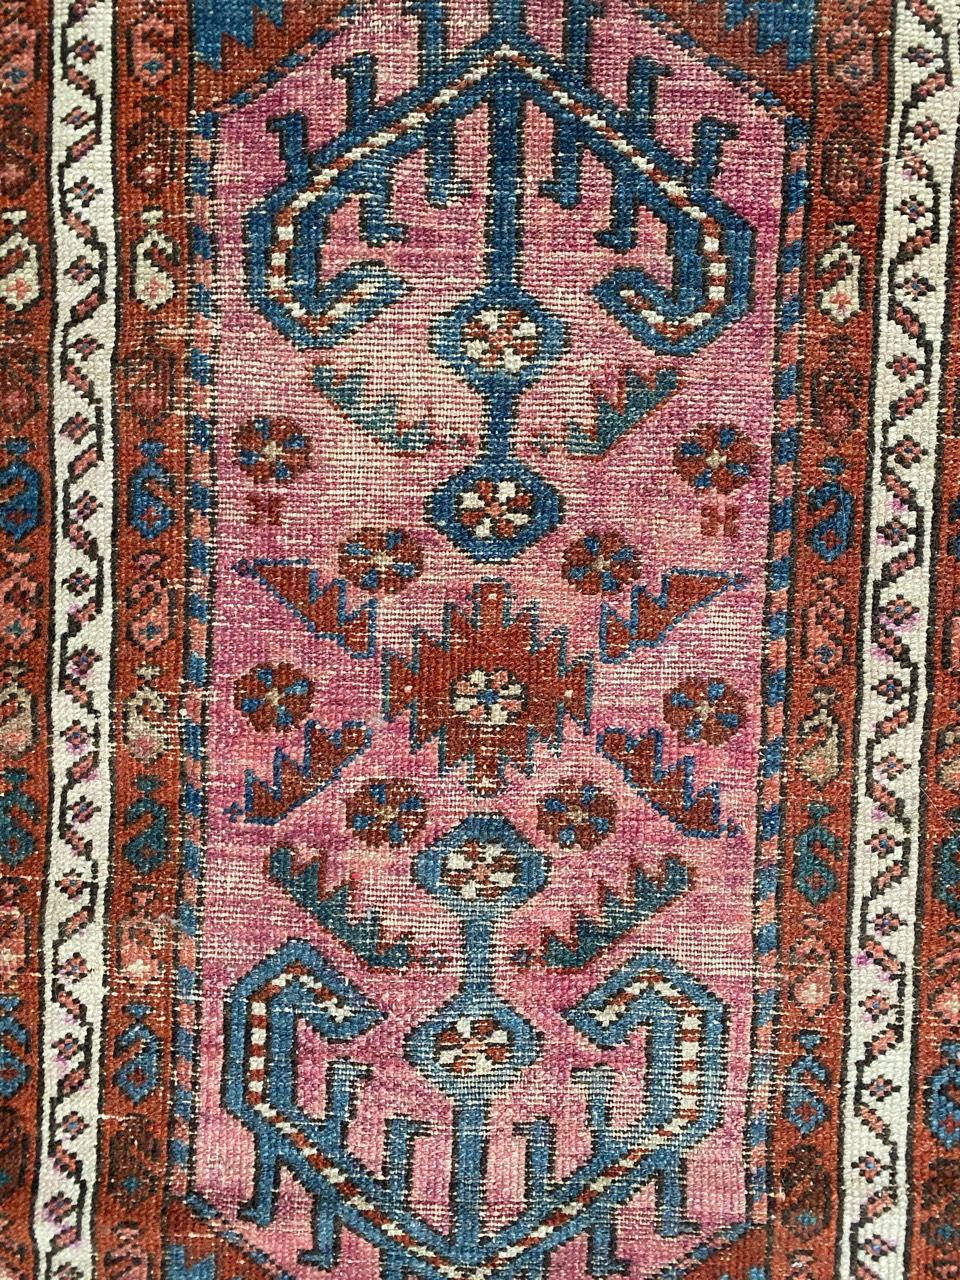 Very beautiful late 19th century little rug with a tribal design and nice colors with red, purple and blue, entirely hand knotted with wool velvet on cotton foundation.